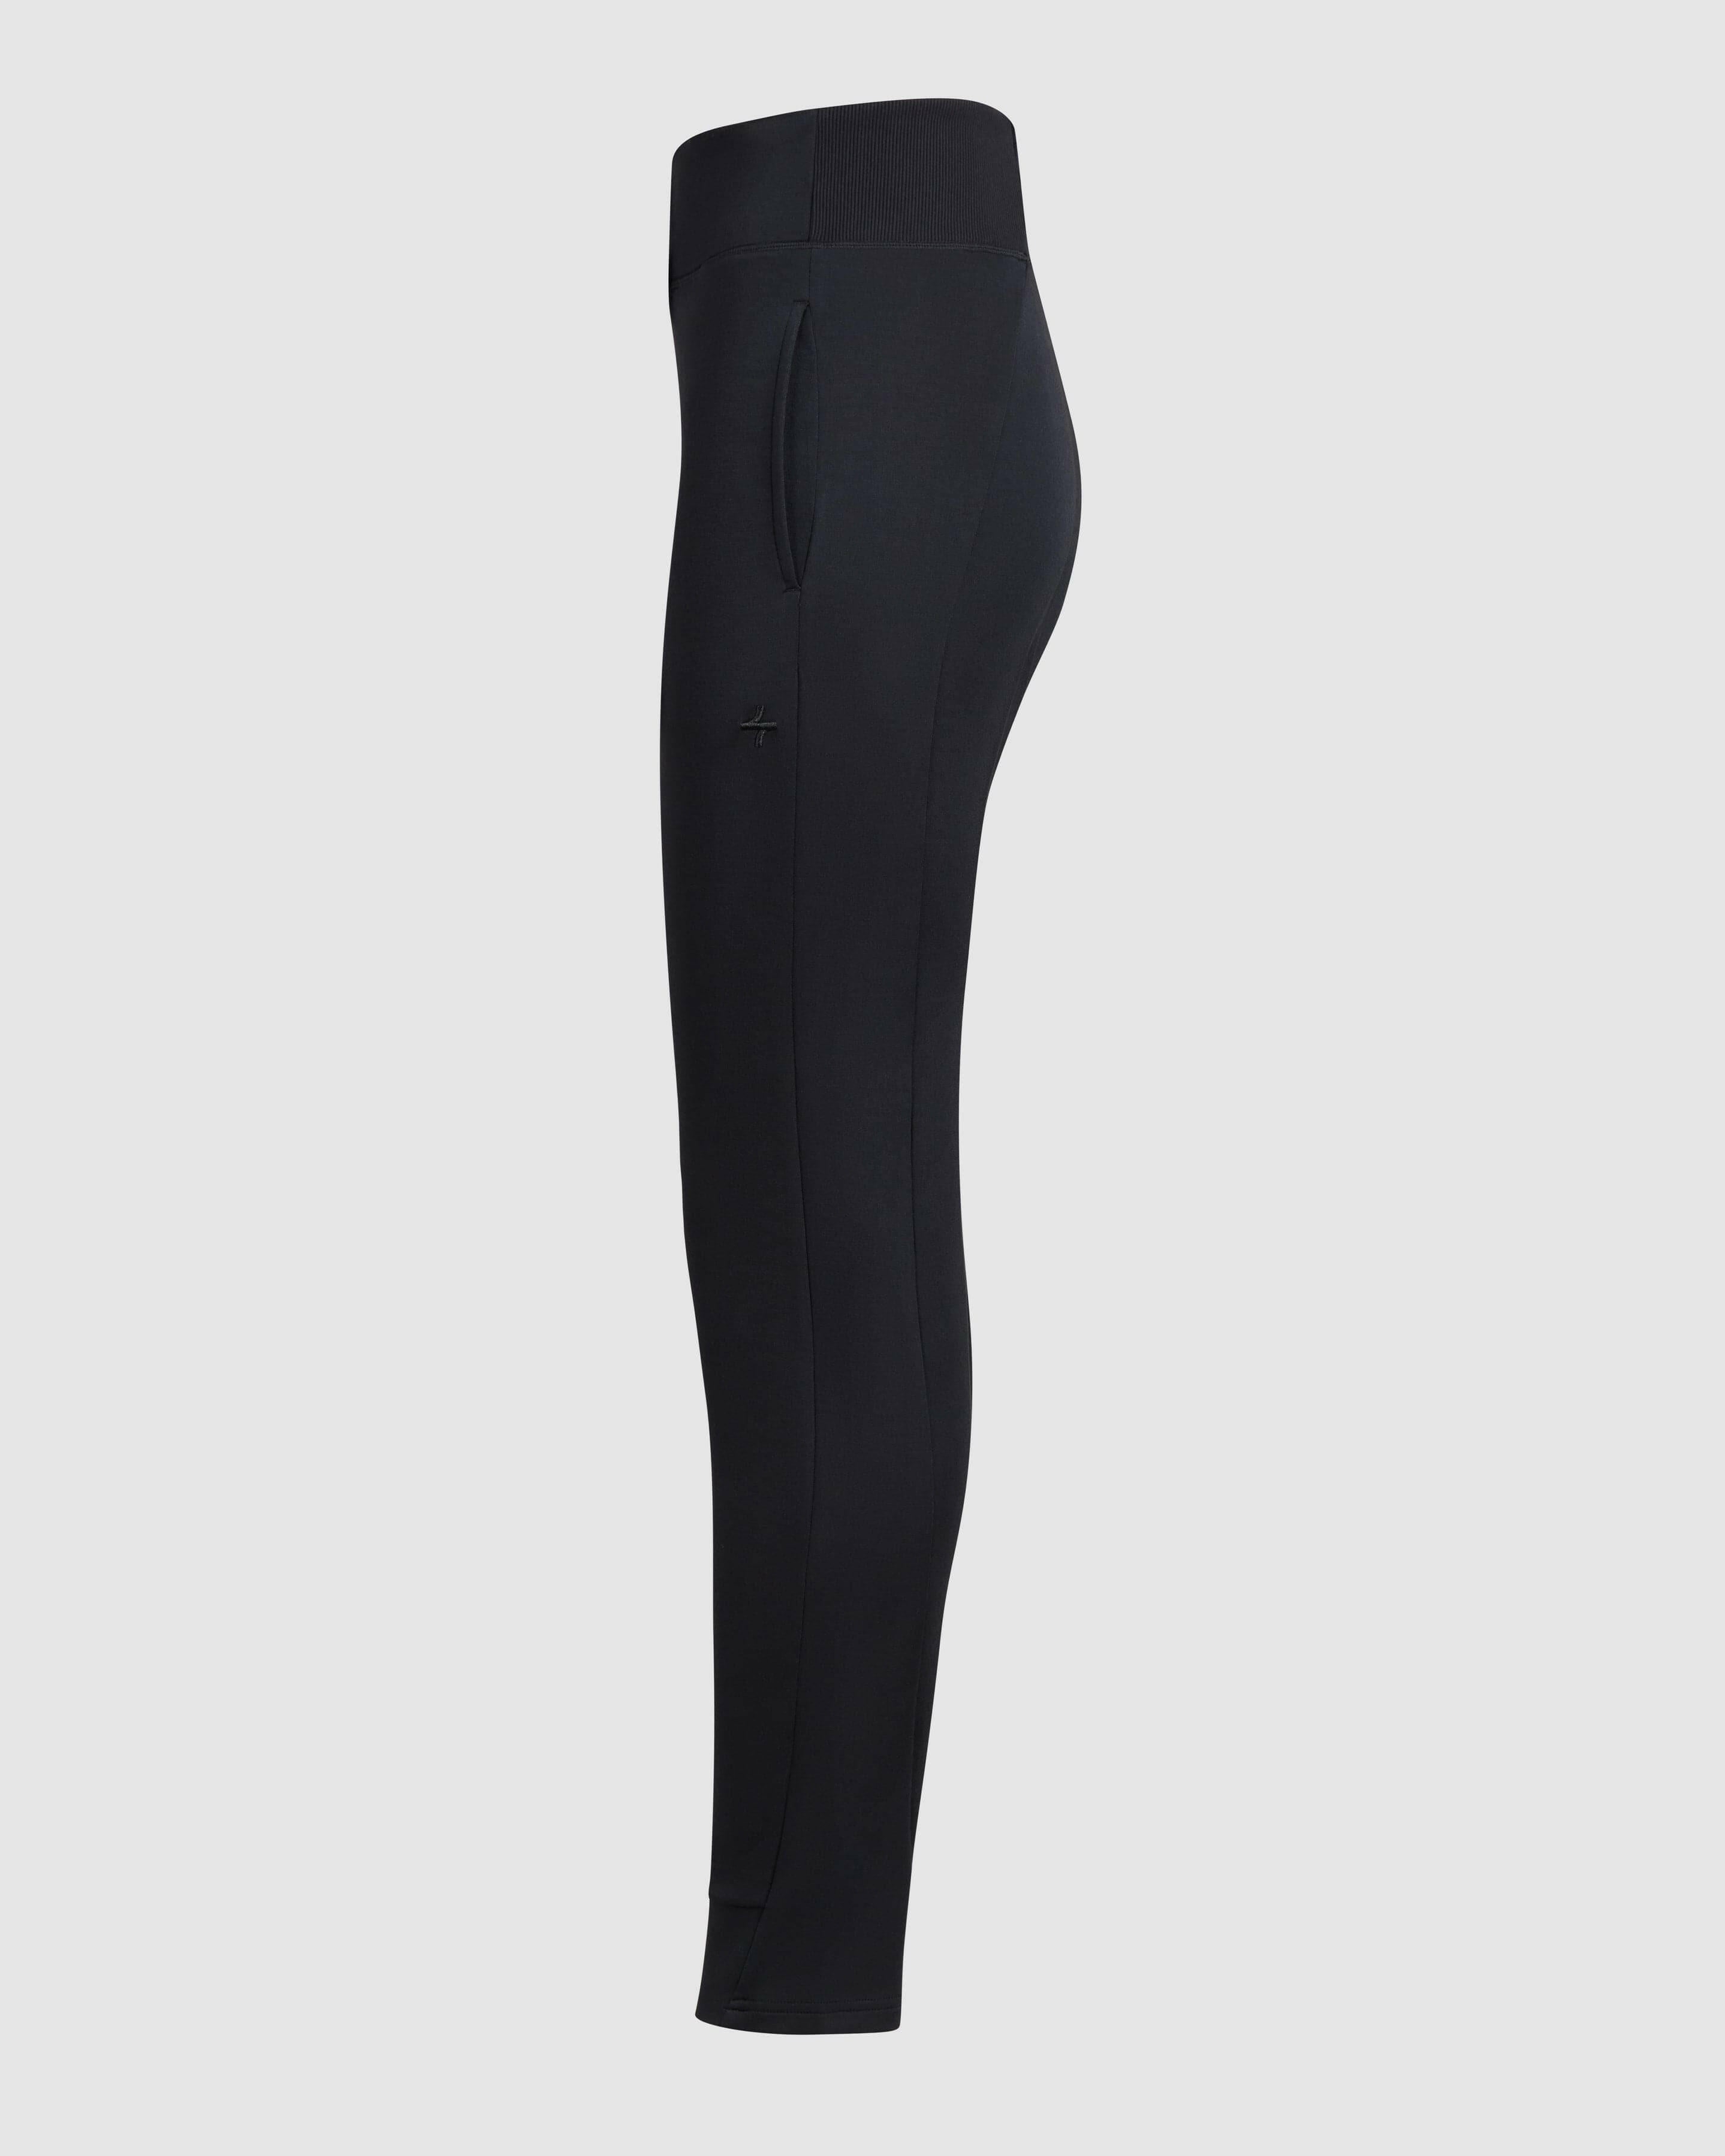 Black color, women's all year Modest JOG JOGGER by Qynda isolated on a white background.